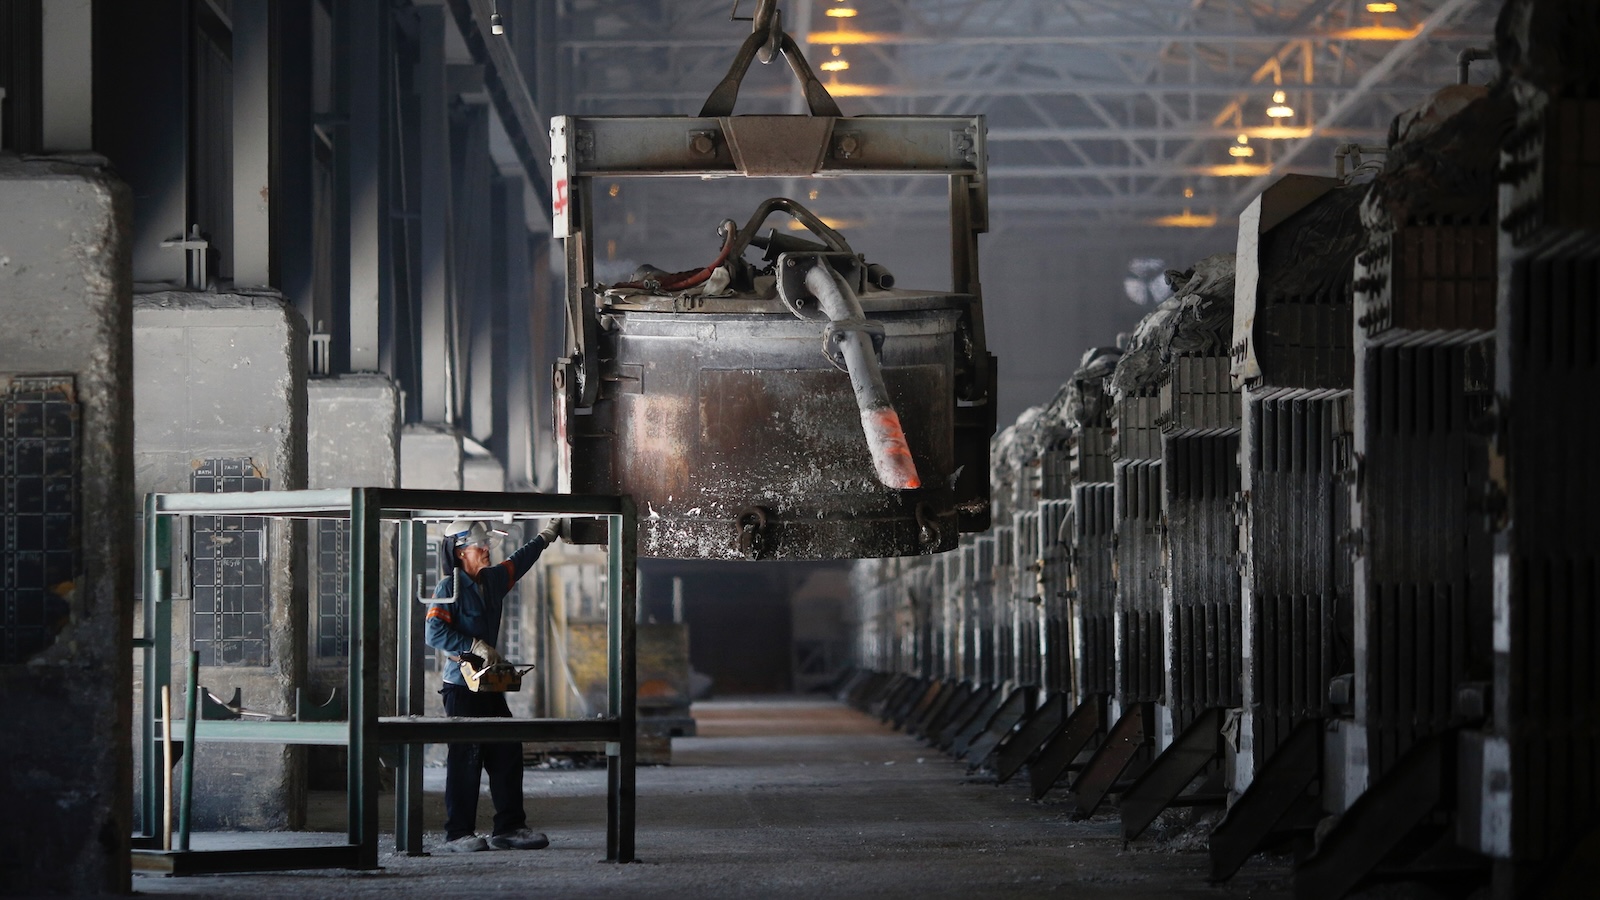 The country’s first new aluminum smelter in 45 years could cut production emissions by 75%